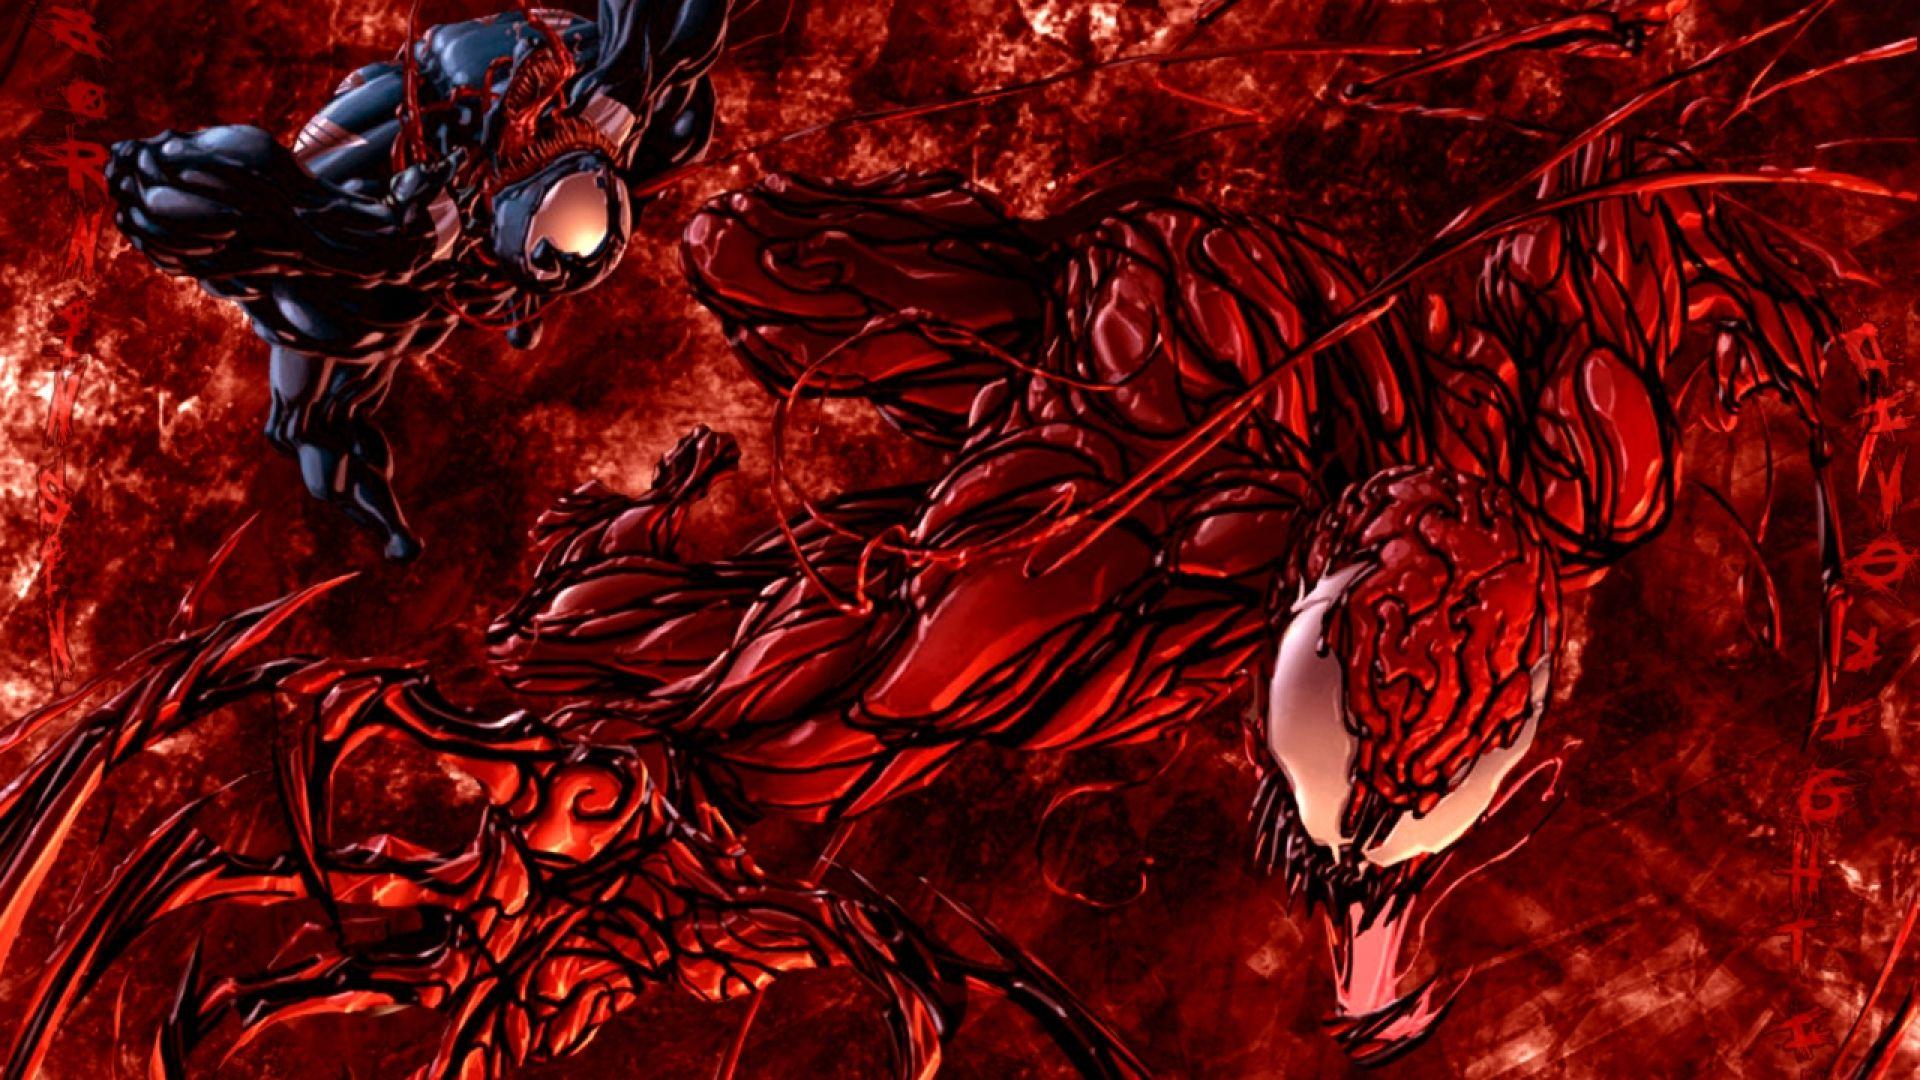 Download Free Modern Carnage The Wallpaper 1920x1080px. HD